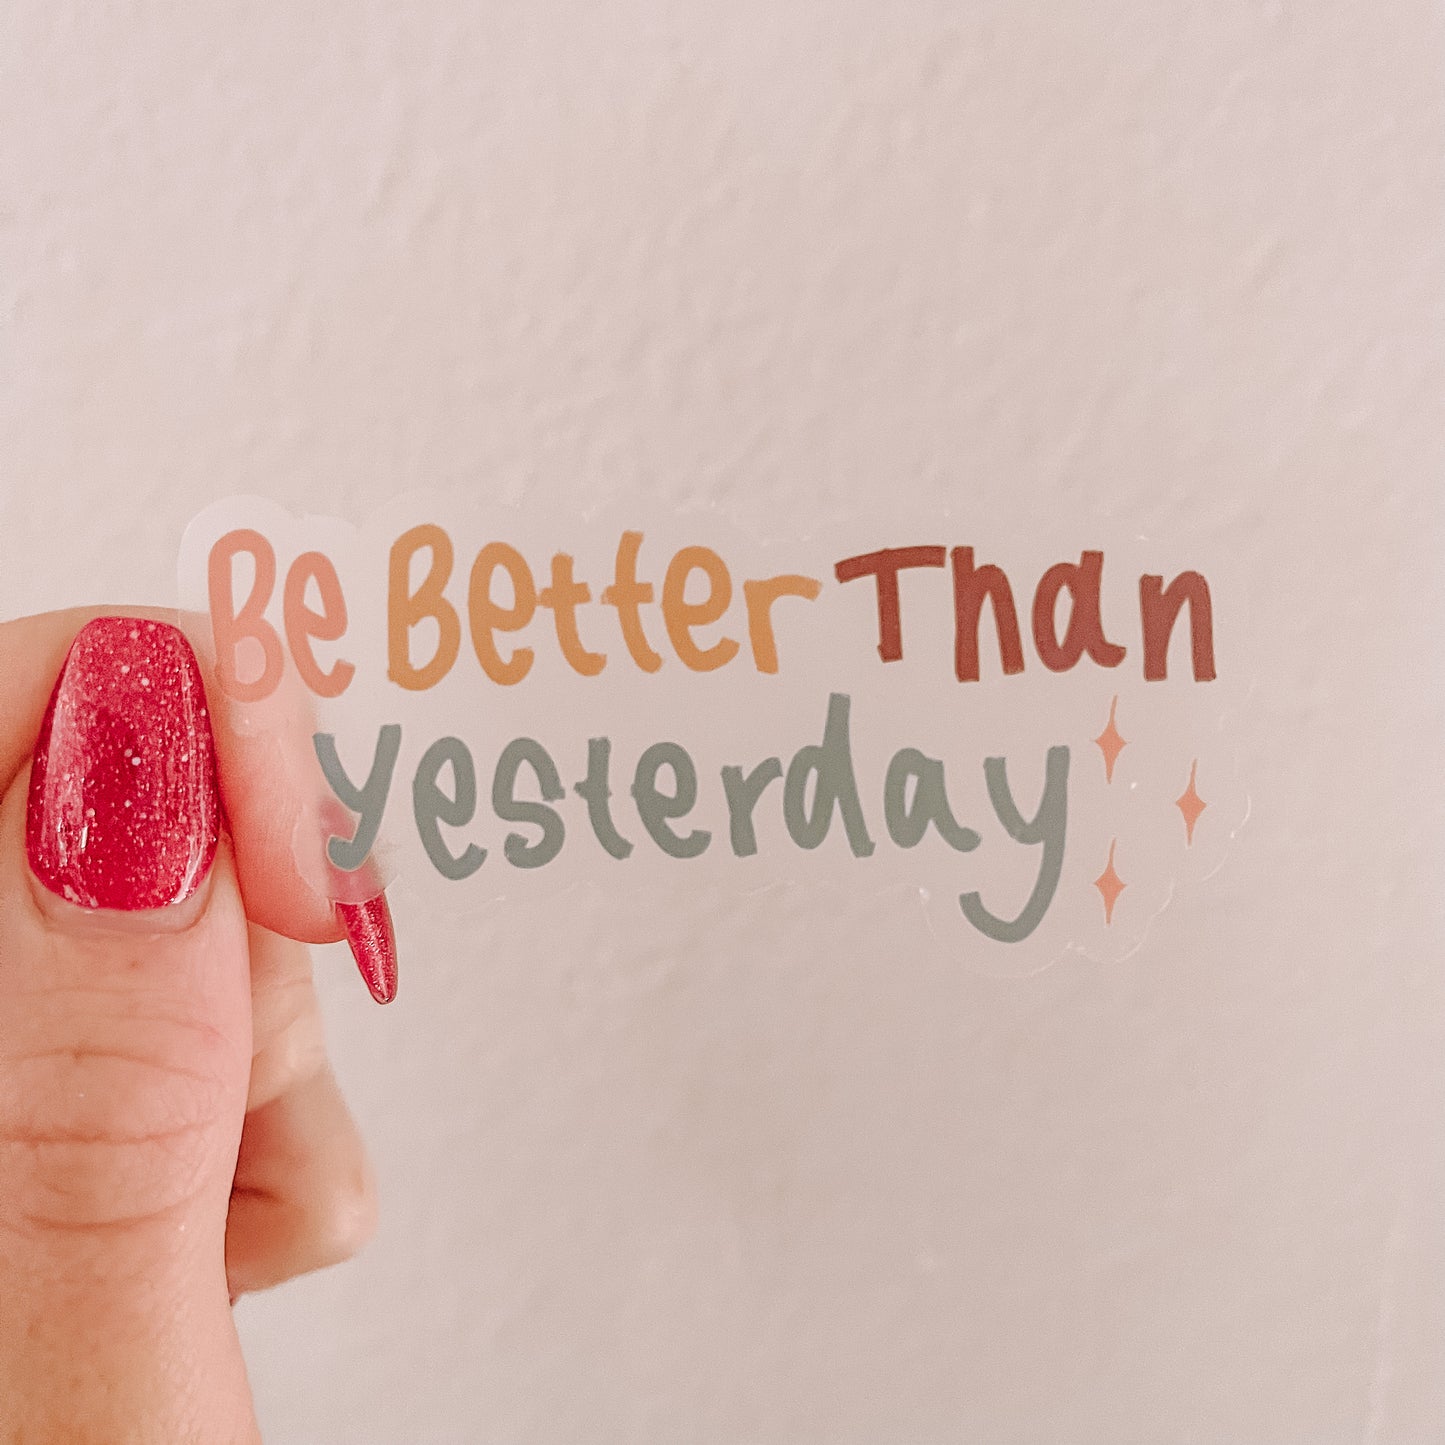 CLEAR Be Better Than Yesterday Sticker